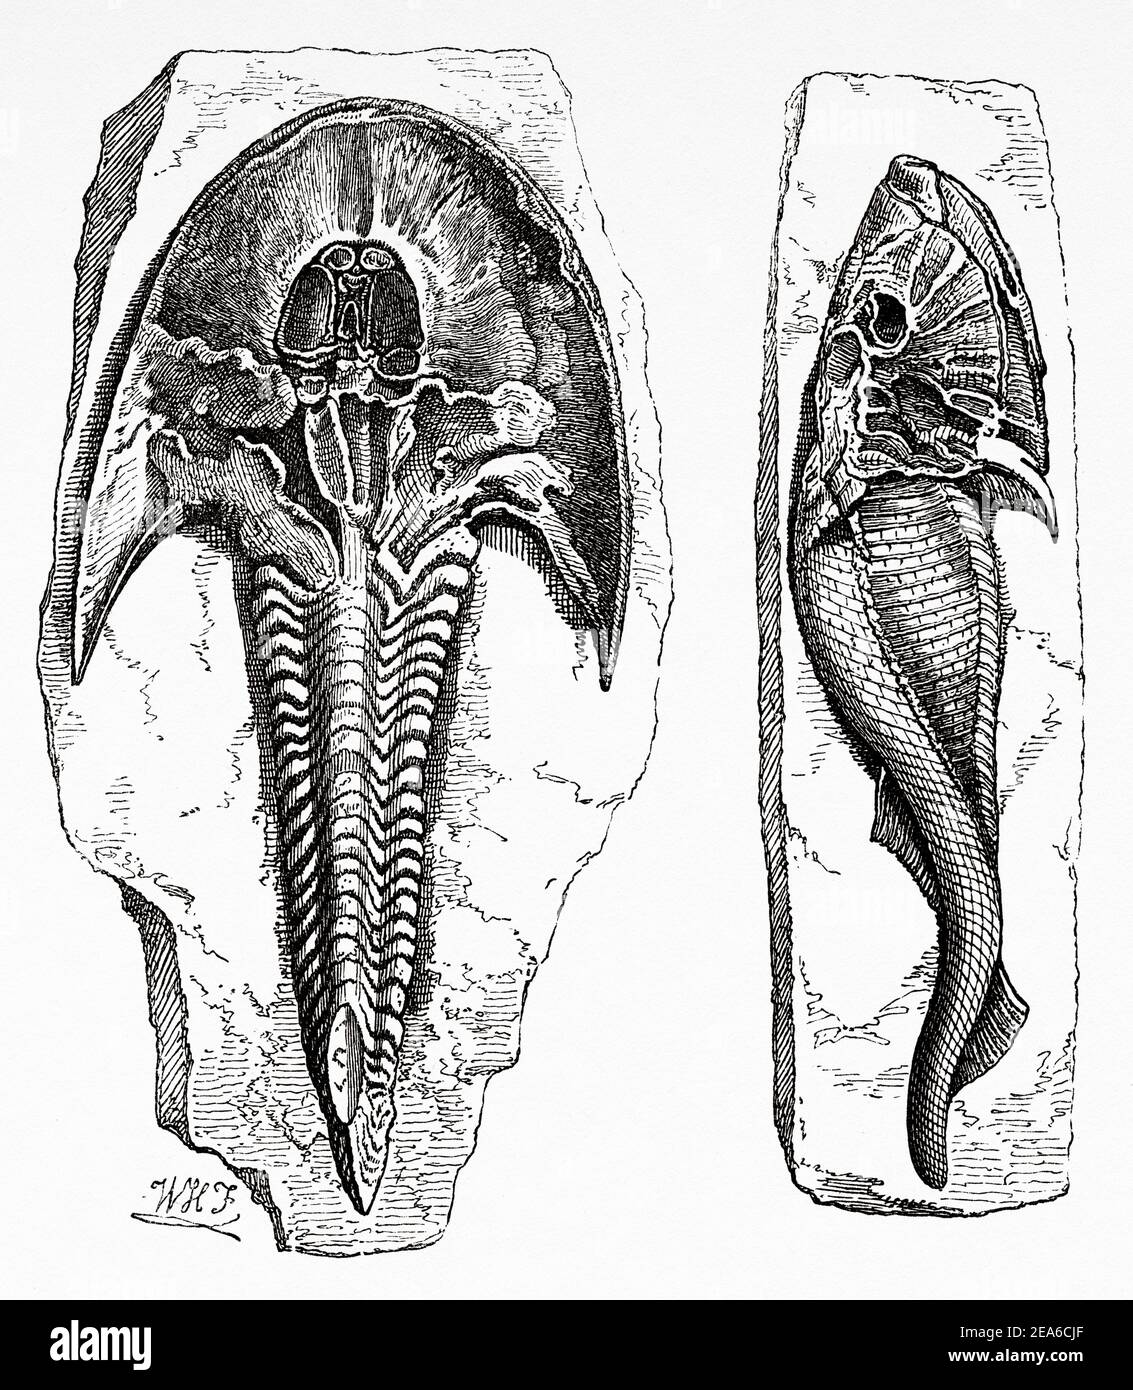 Old Nineteenth century illustration. Cephalaspis, an extinct genus of agnate fish of the class Osteostraci, were protected by armor. They were detritivore fish from the Devonian period in Western Europe. Old 19th century engraved illustration from El Mundo Ilustrado 1879 Stock Photo